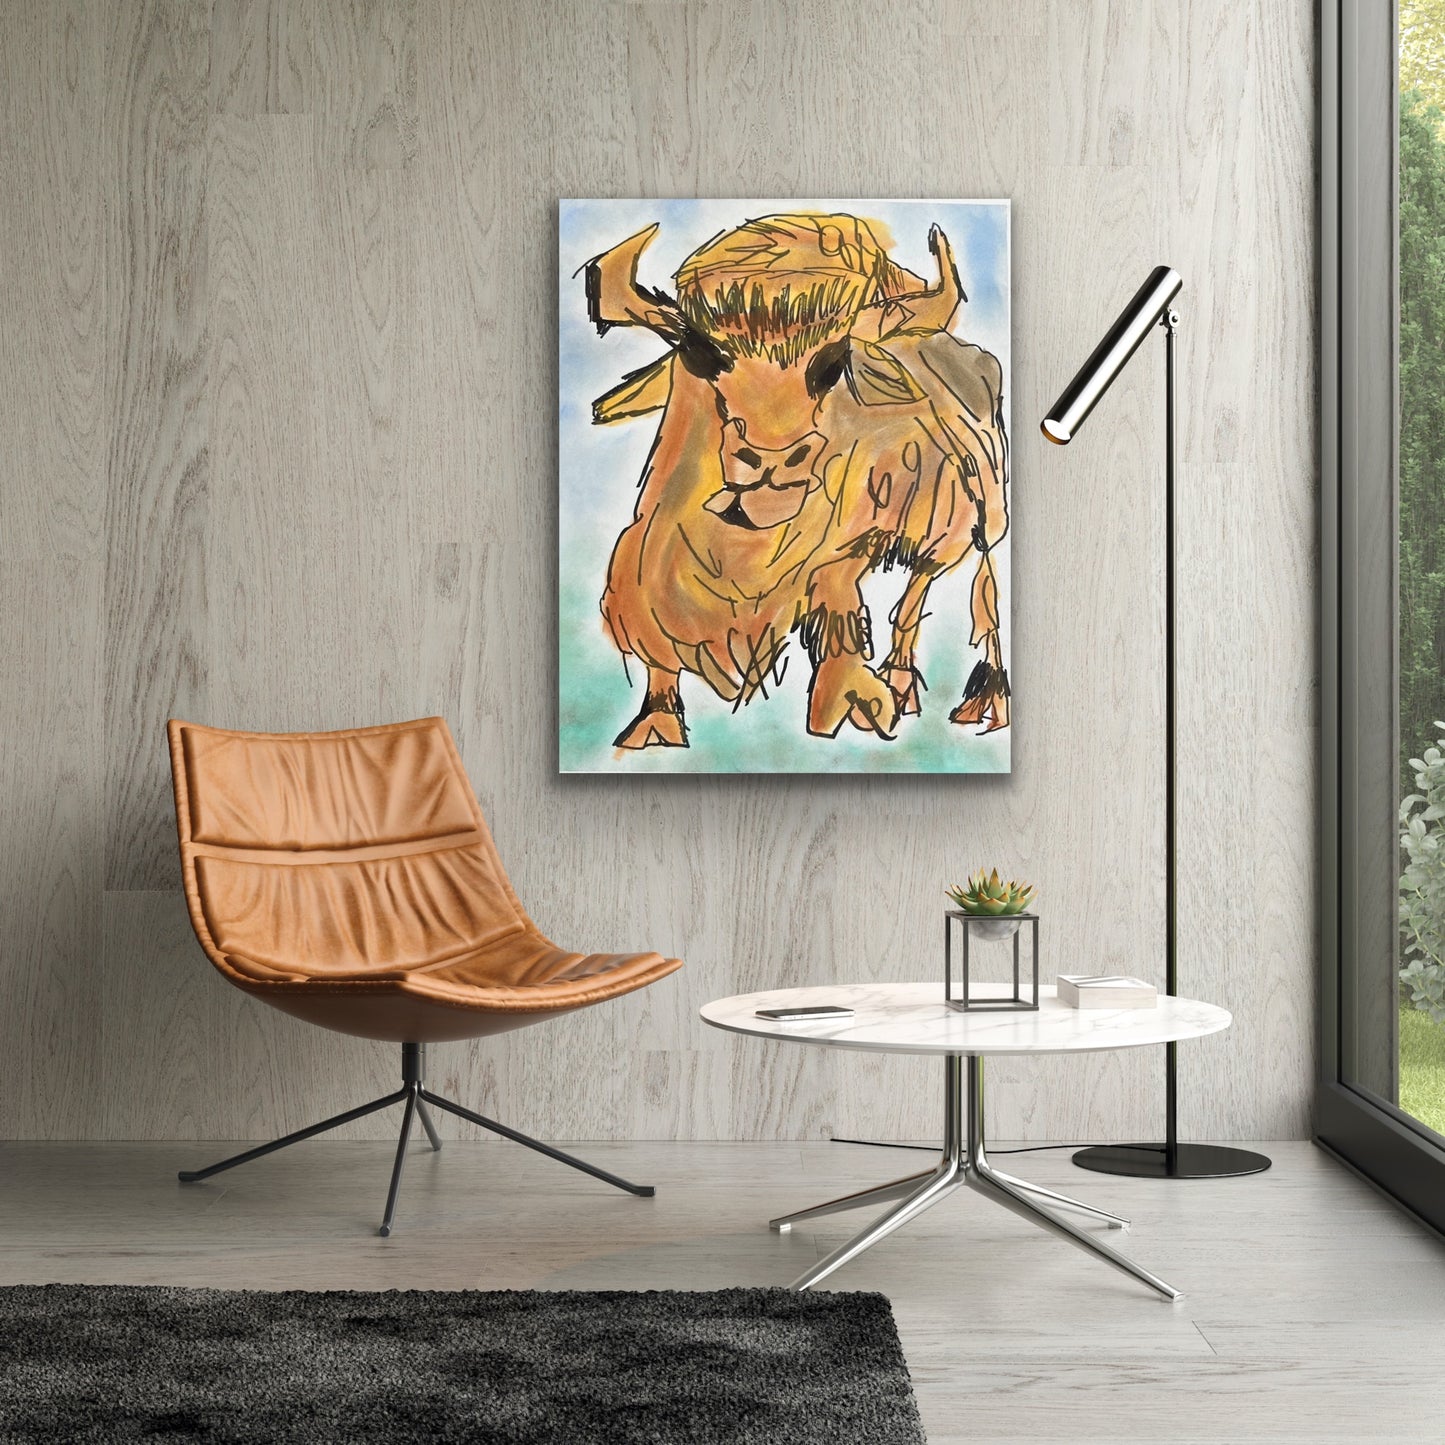 YAK - Stretched Canvas Print in more sizes